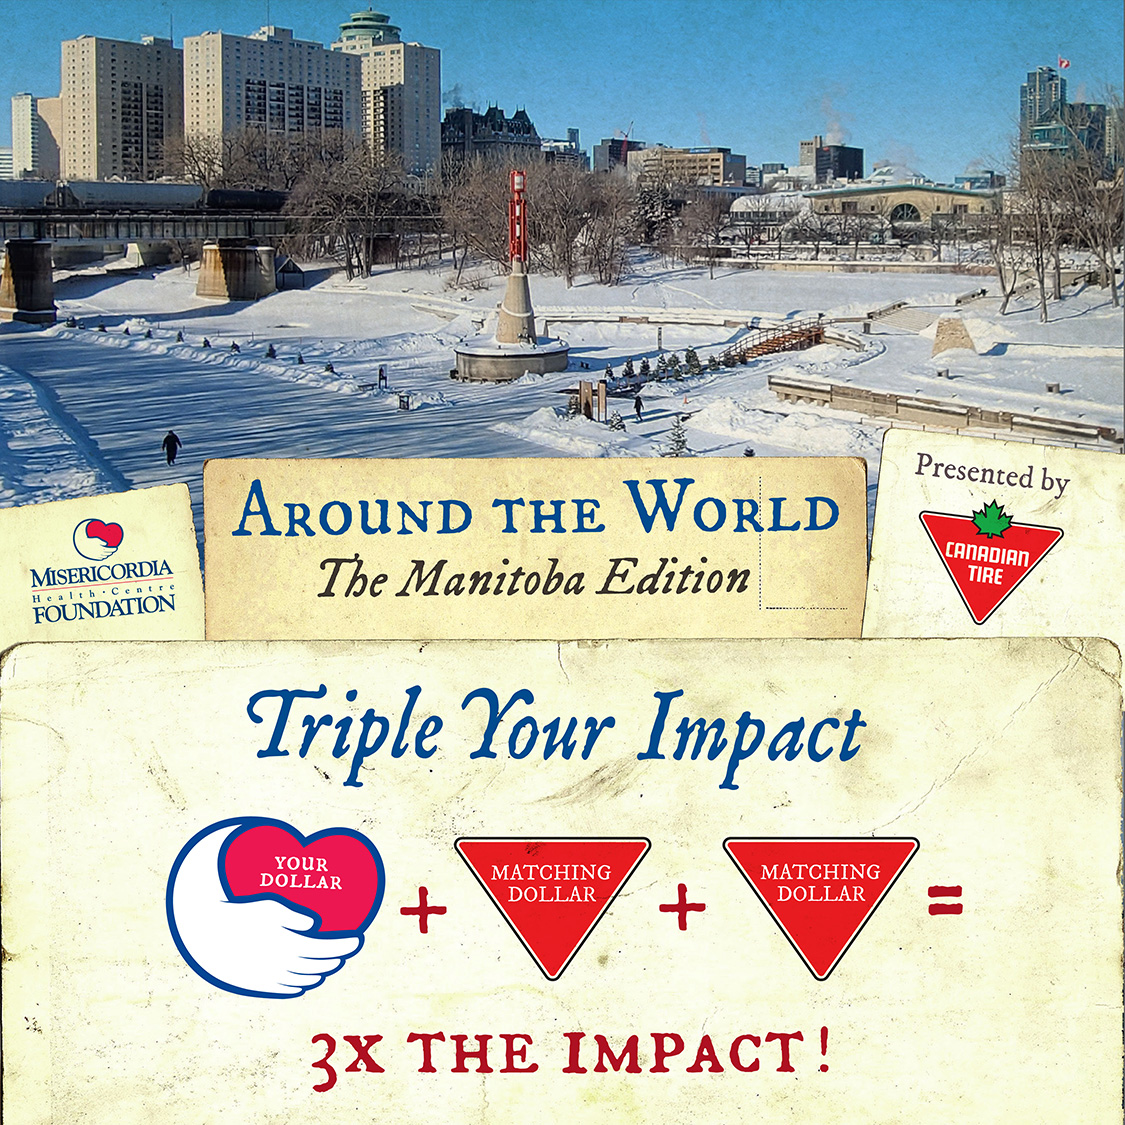 Around the World in 80 days, triple your impact Misericordia Banner